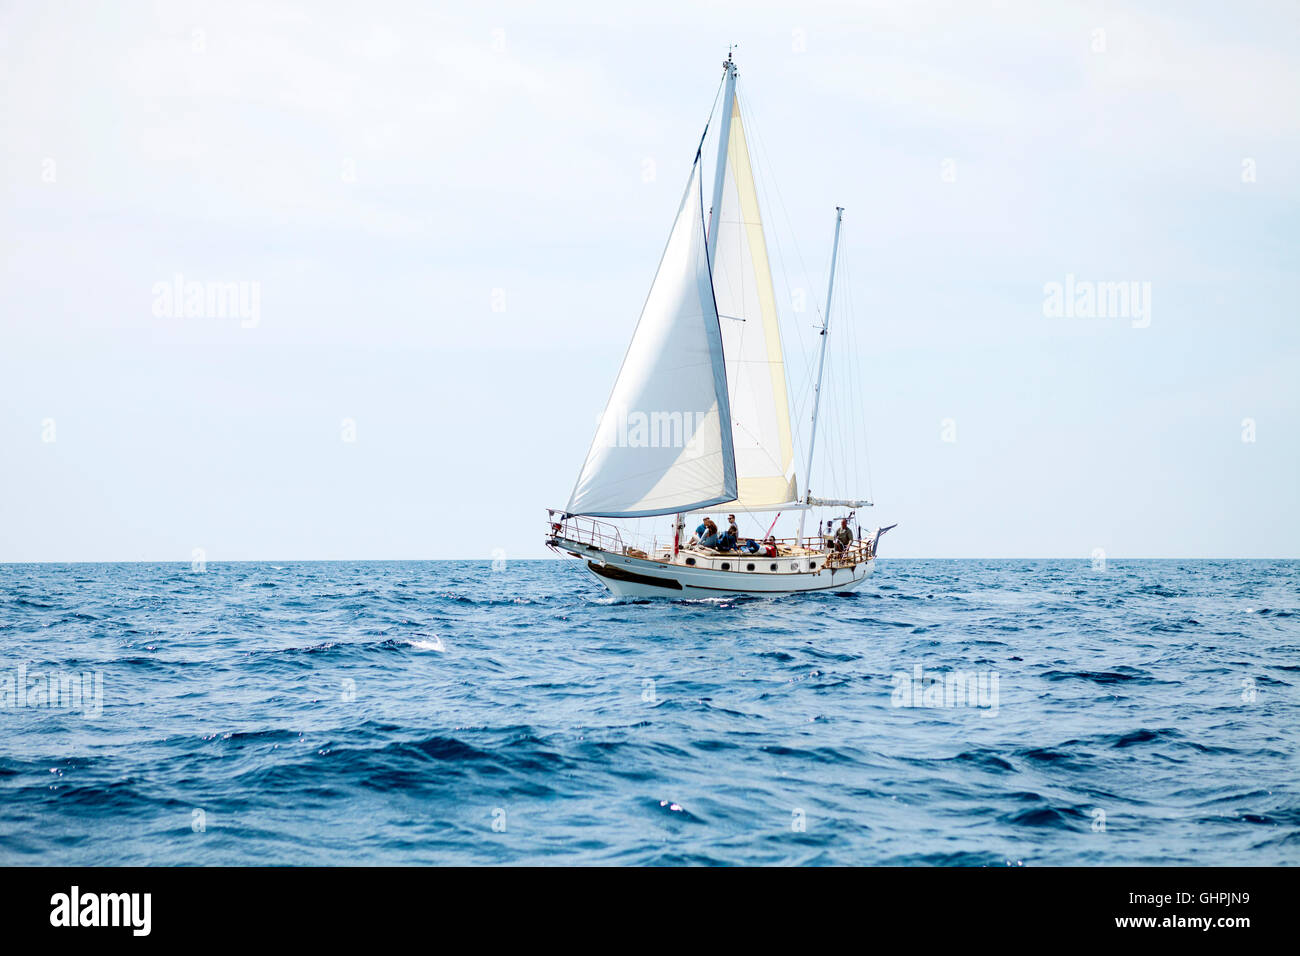 View of Adriatic Sea with sailing ship Stock Photo